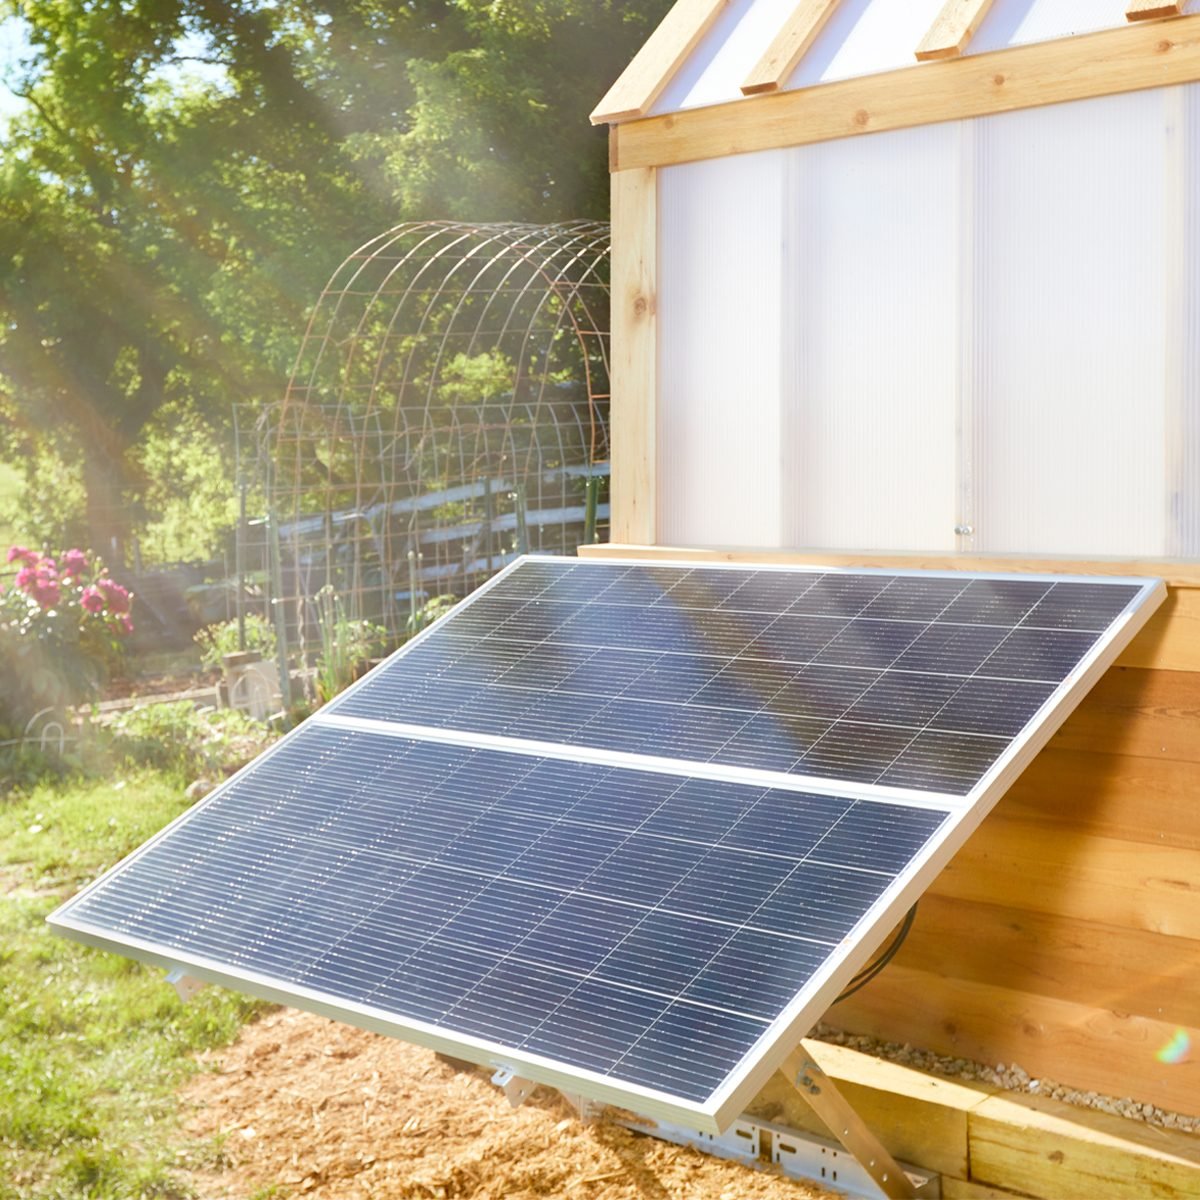 Fh22sep 620 51 037 What To Know About Installing An Off Grid Solar Power System